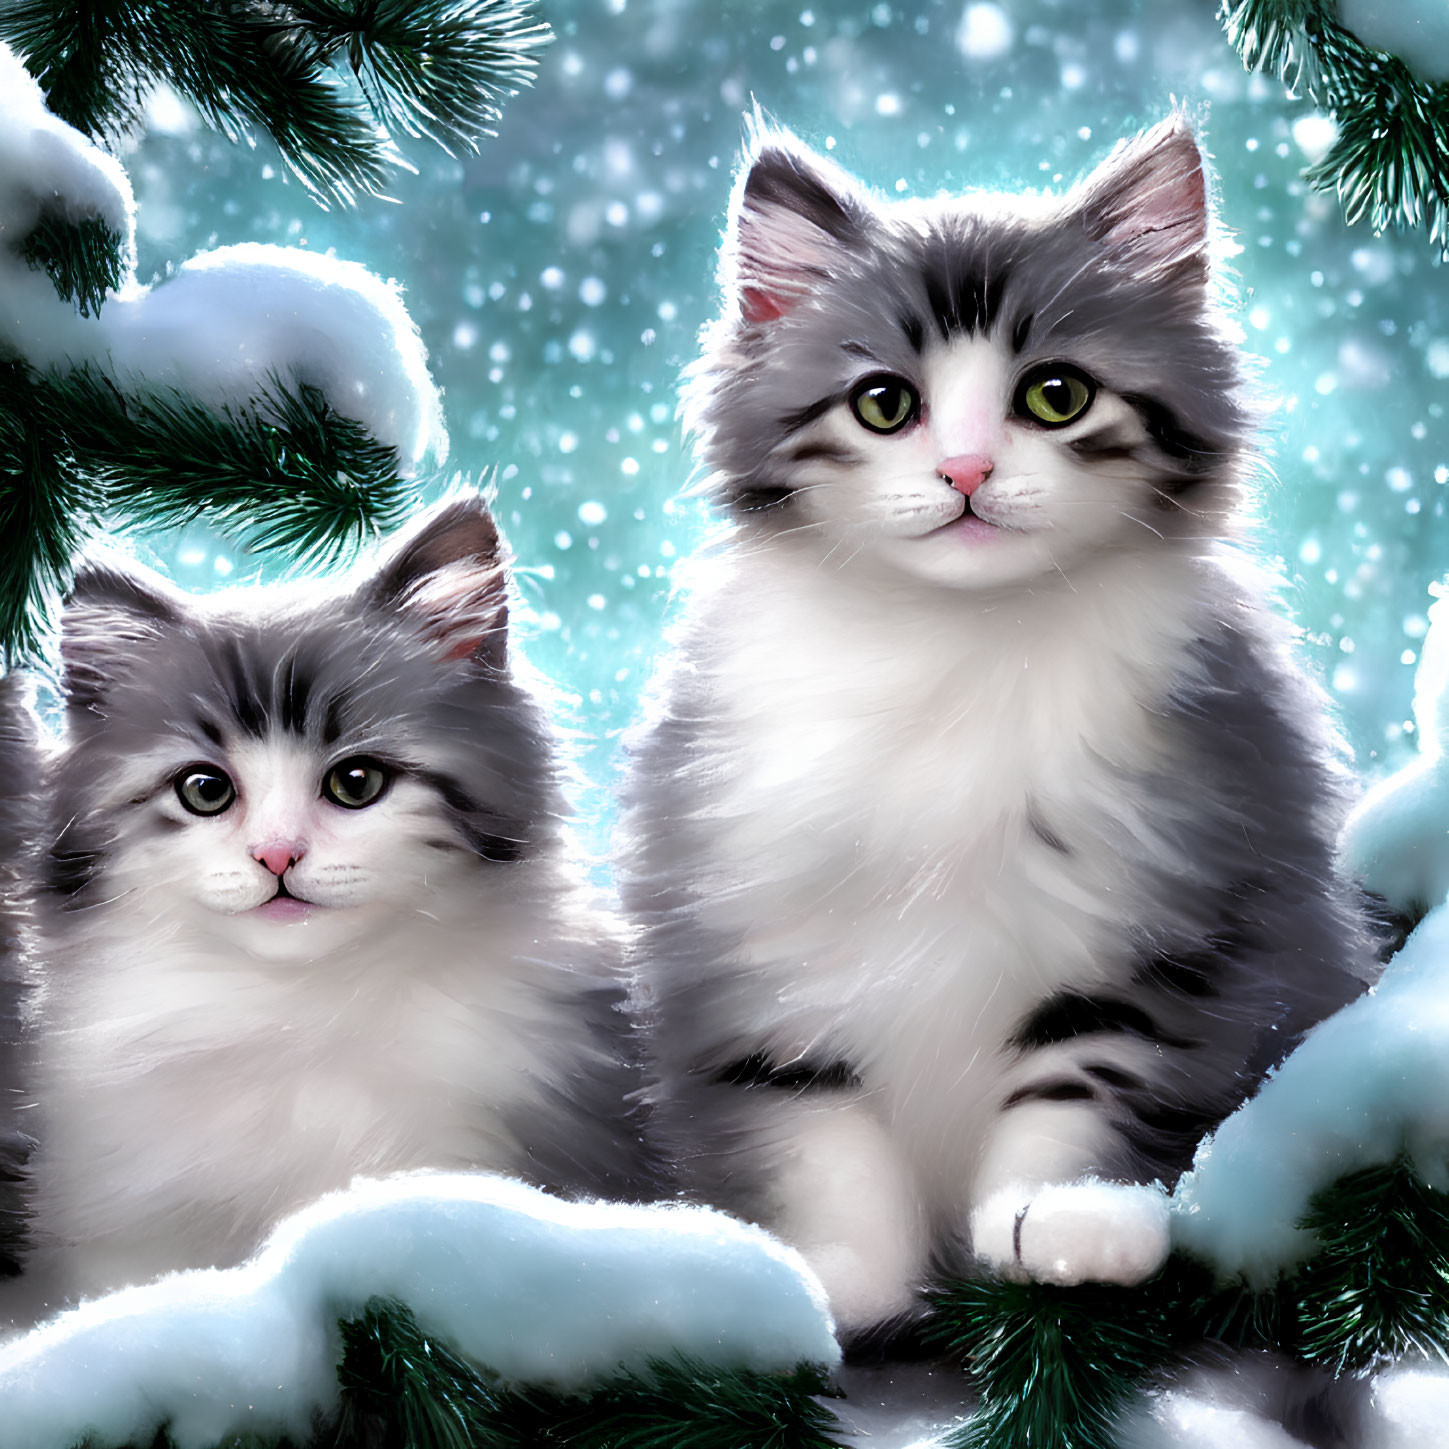 Fluffy cats with green eyes under pine branches in snowfall